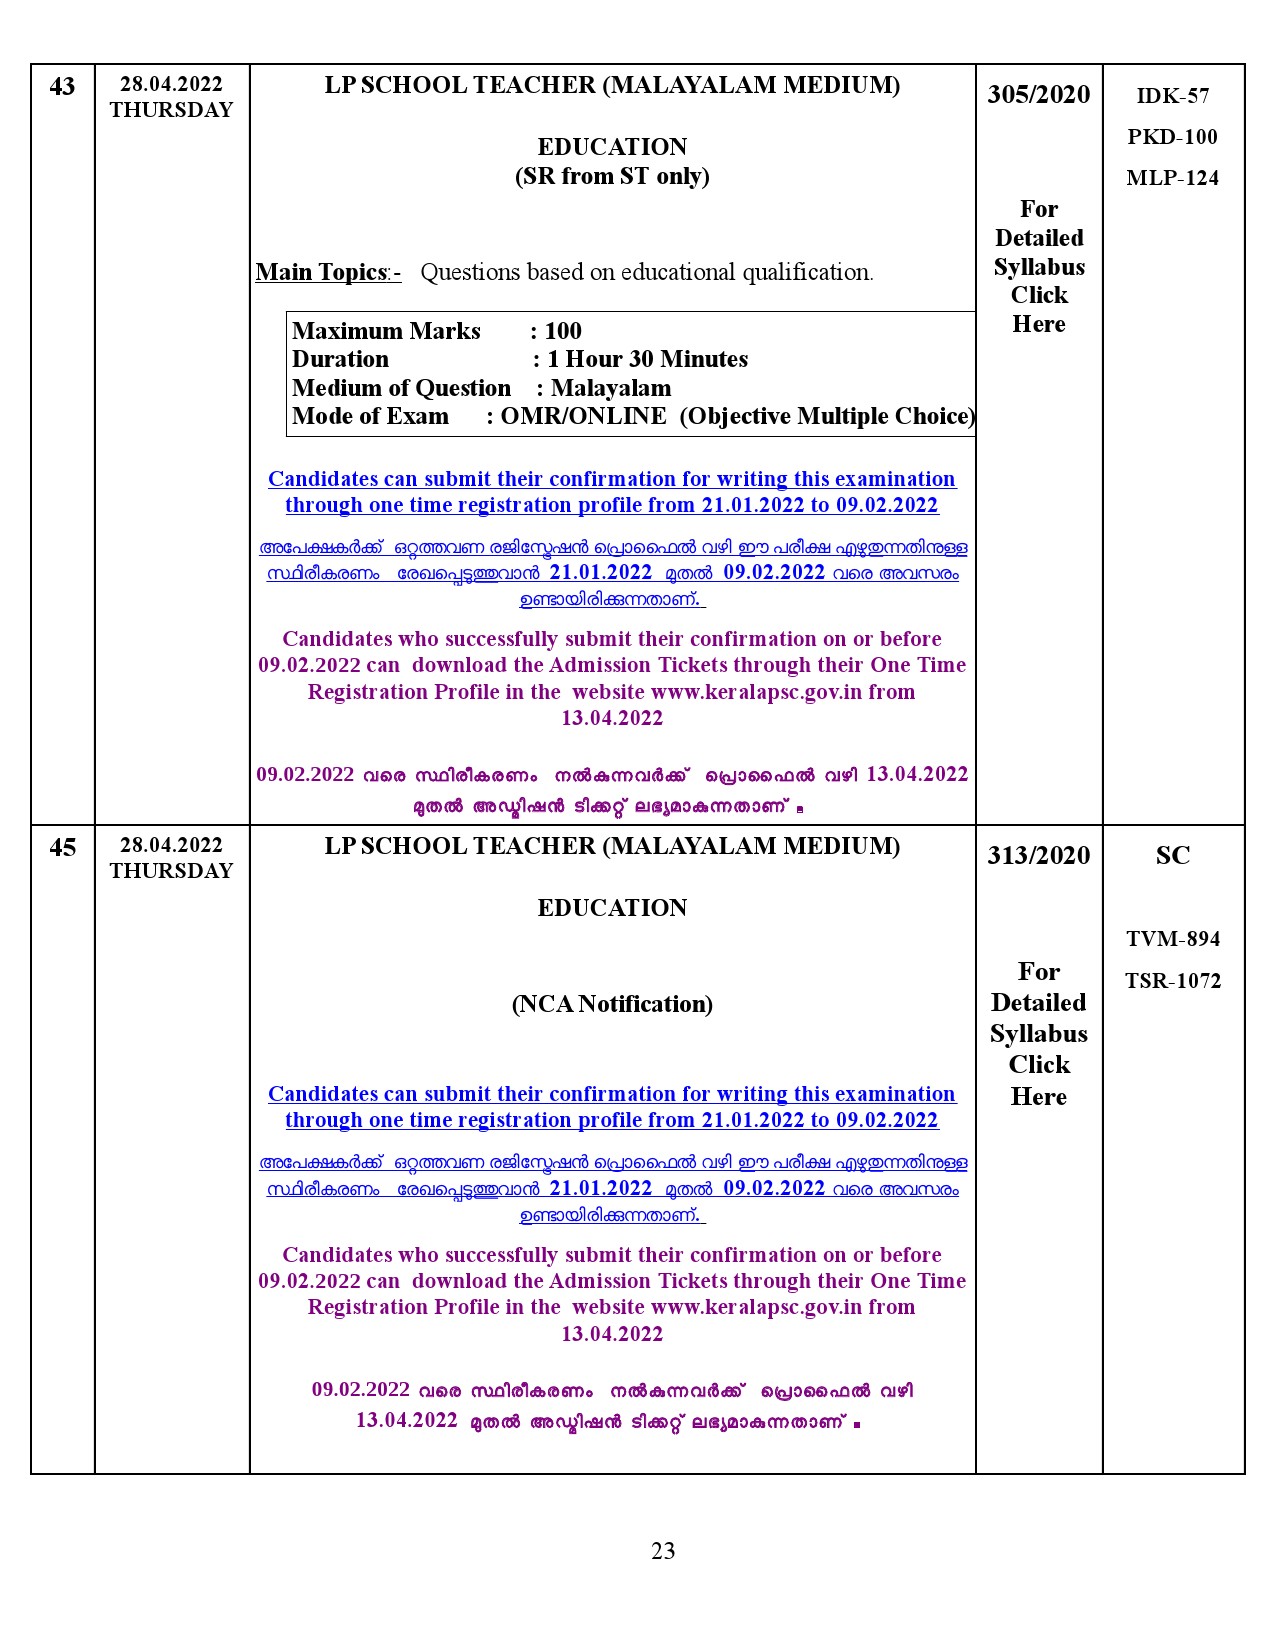 Examination Programme For The Month Of April 2022 - Notification Image 23